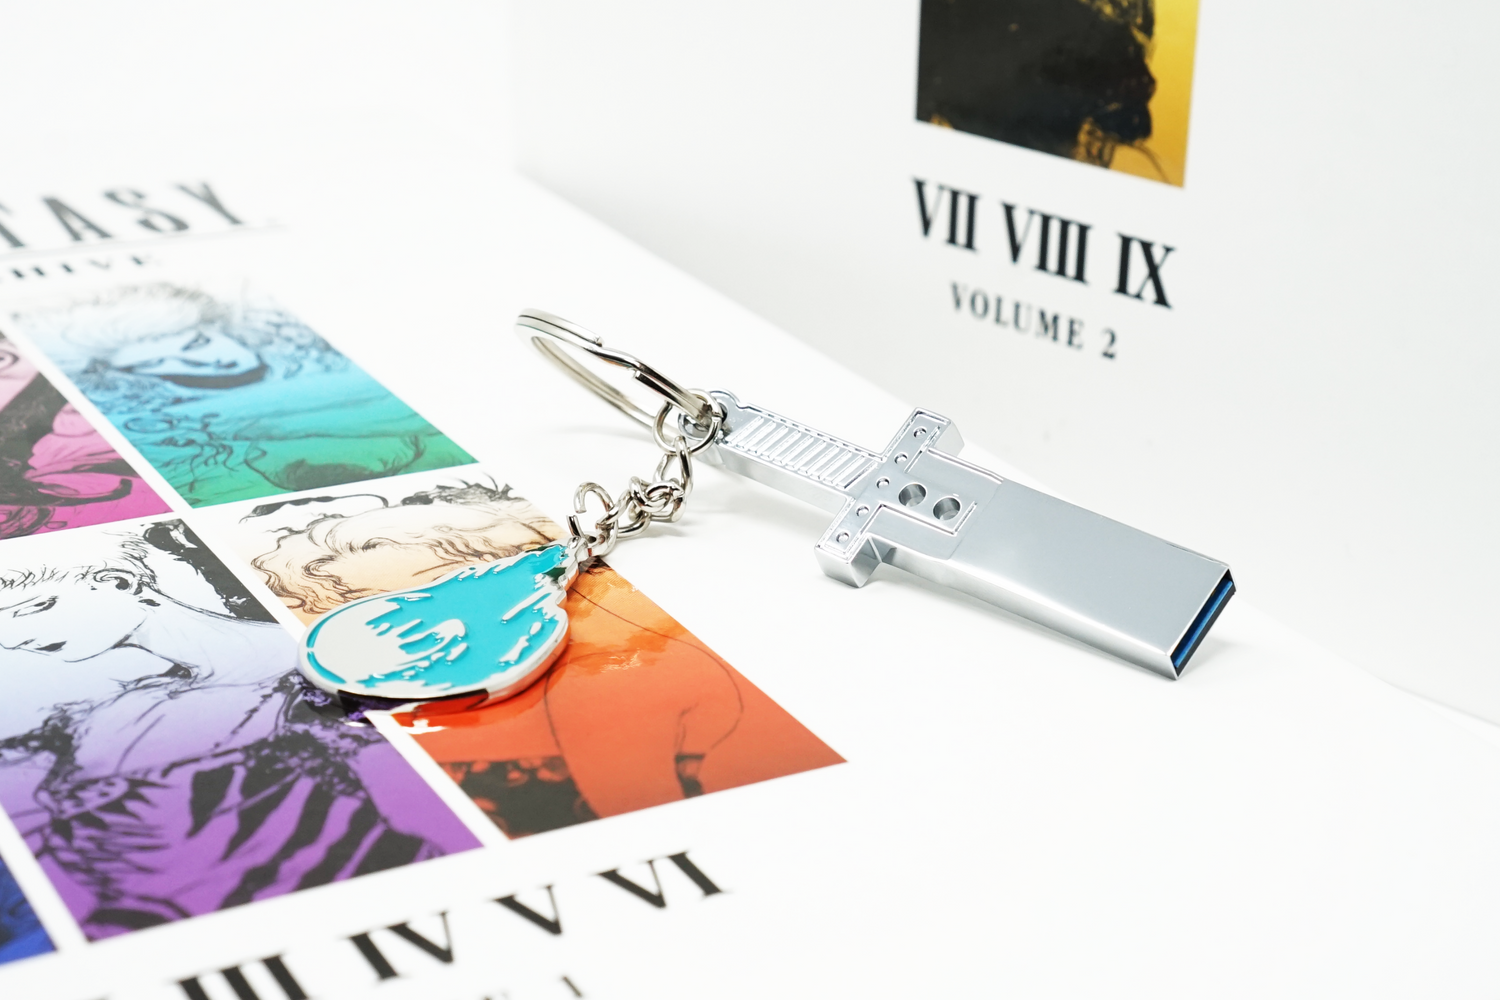 A silver USB drive and a cyan keychain on top of a variety of white books featuring art from Final Fantasy games